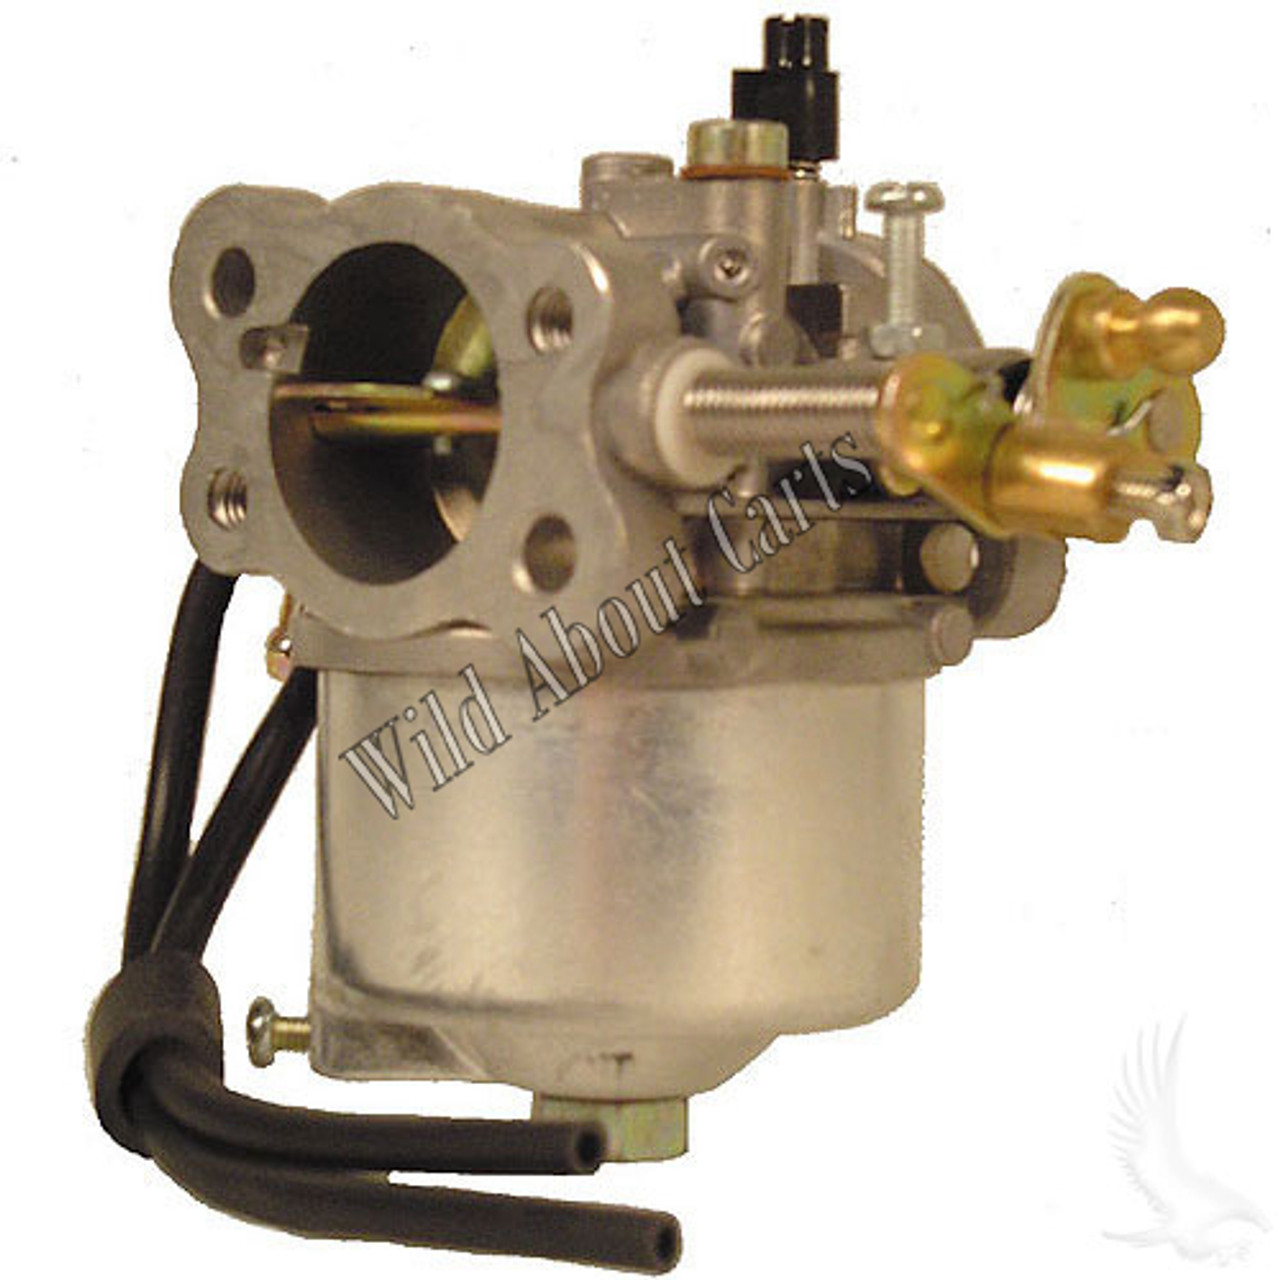 E-Z-GO Carburetor 4-cycle (Years 1991-2002), 17553